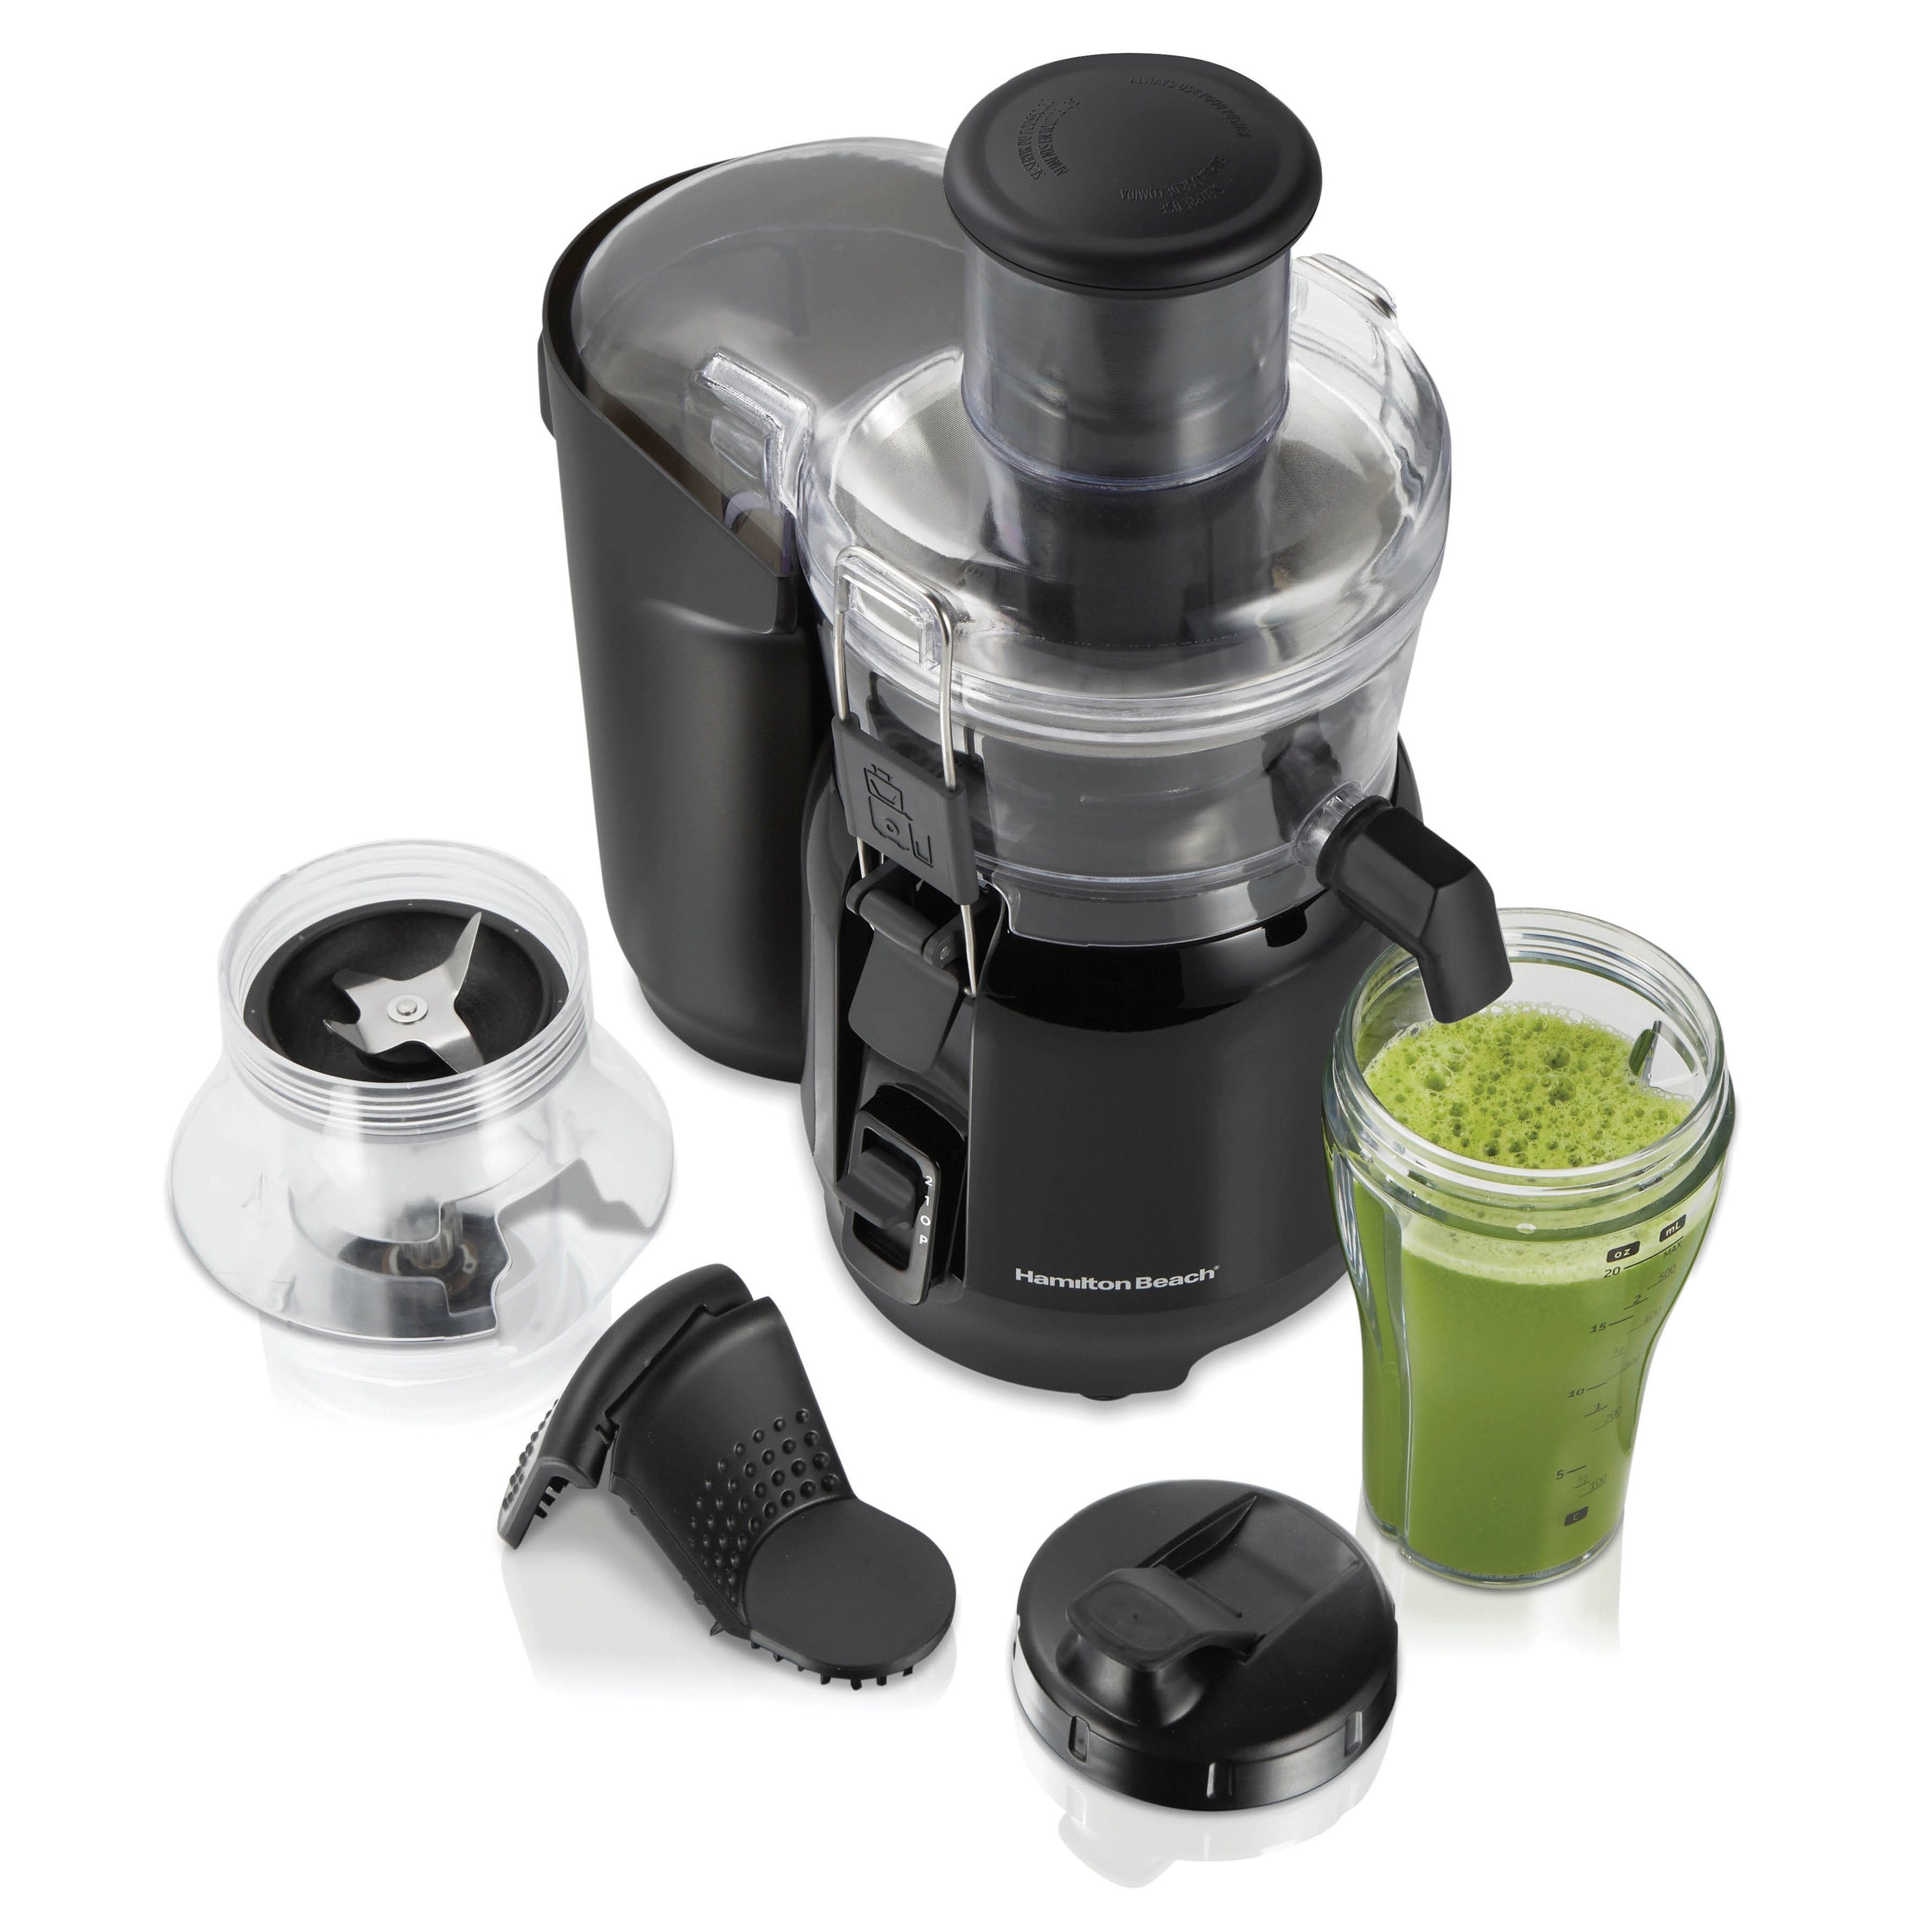 https://ak1.ostkcdn.com/images/products/is/images/direct/863aded9d60131dd7a4ade9413b7bd9da0cd3958/Big-Mouth-Juice-and-Blend-2-in-1-Juicer-and-Blender.jpg